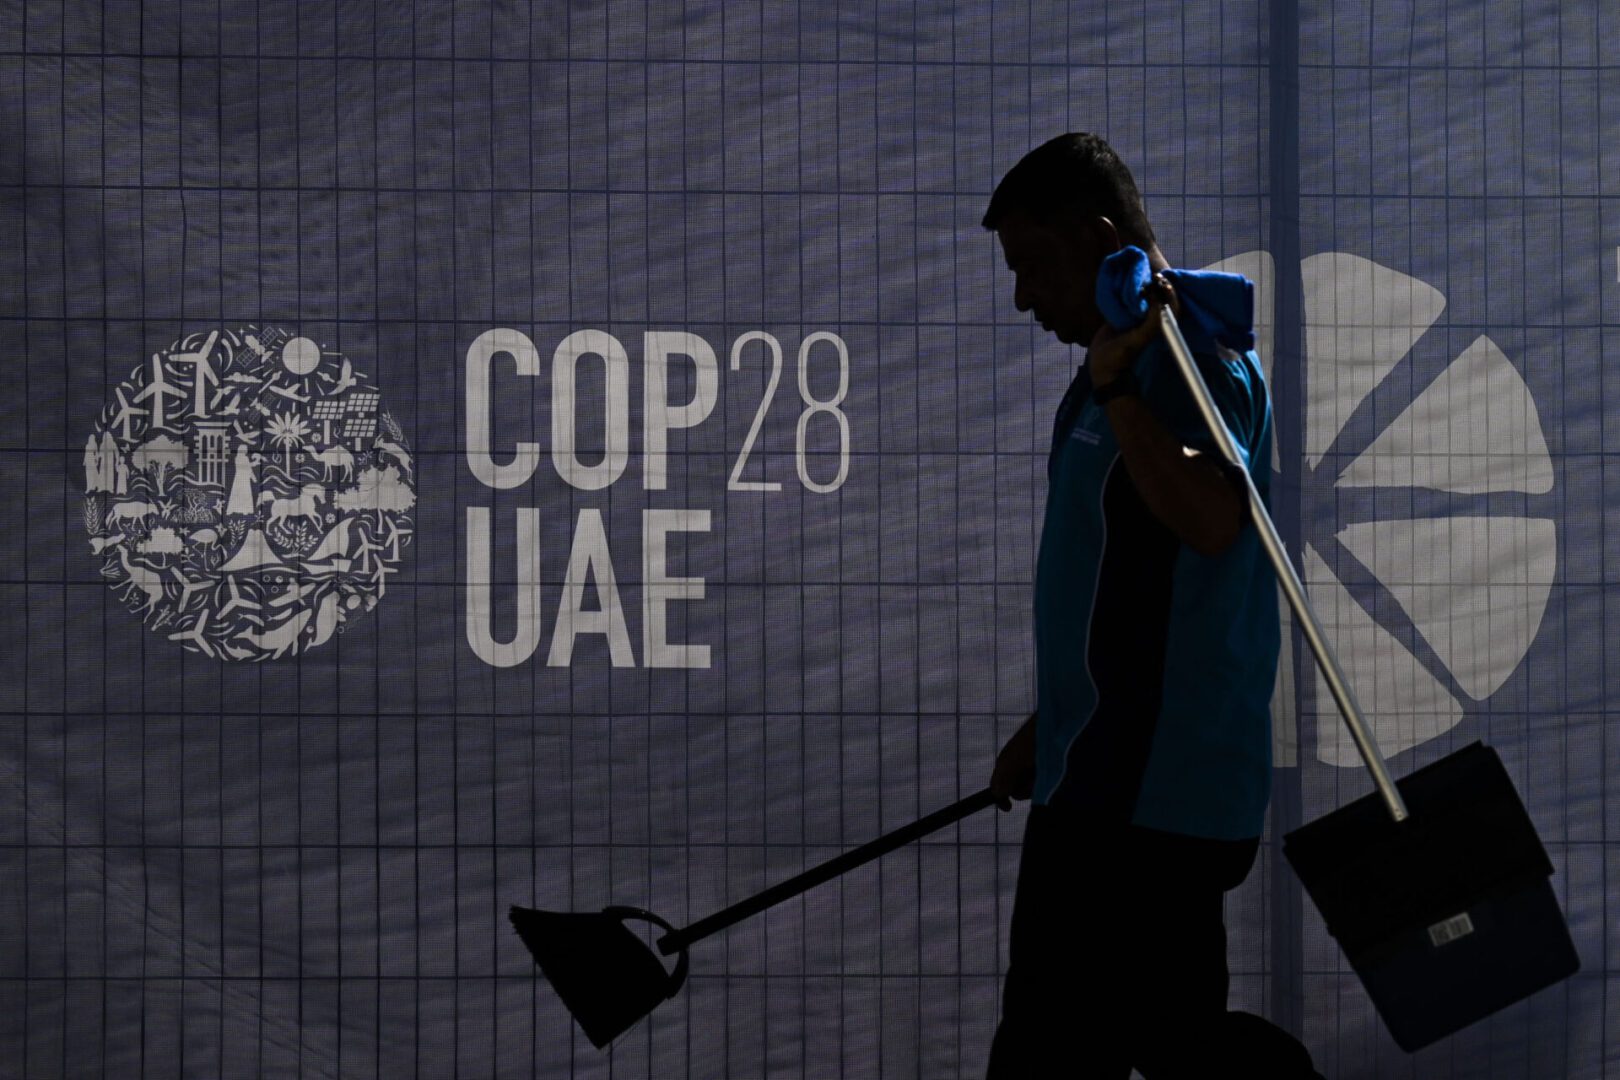 A worker walks past a COP28 logo ahead of the United Nations climate summit in Dubai on November 28, 2023. The UN chief urged world leaders to take decisive action to tackle ever-worsening climate change when they gather at the COP28 summit in Dubai starting this week. (Photo by Jewel SAMAD / AFP) (Photo by JEWEL SAMAD/AFP via Getty Images)